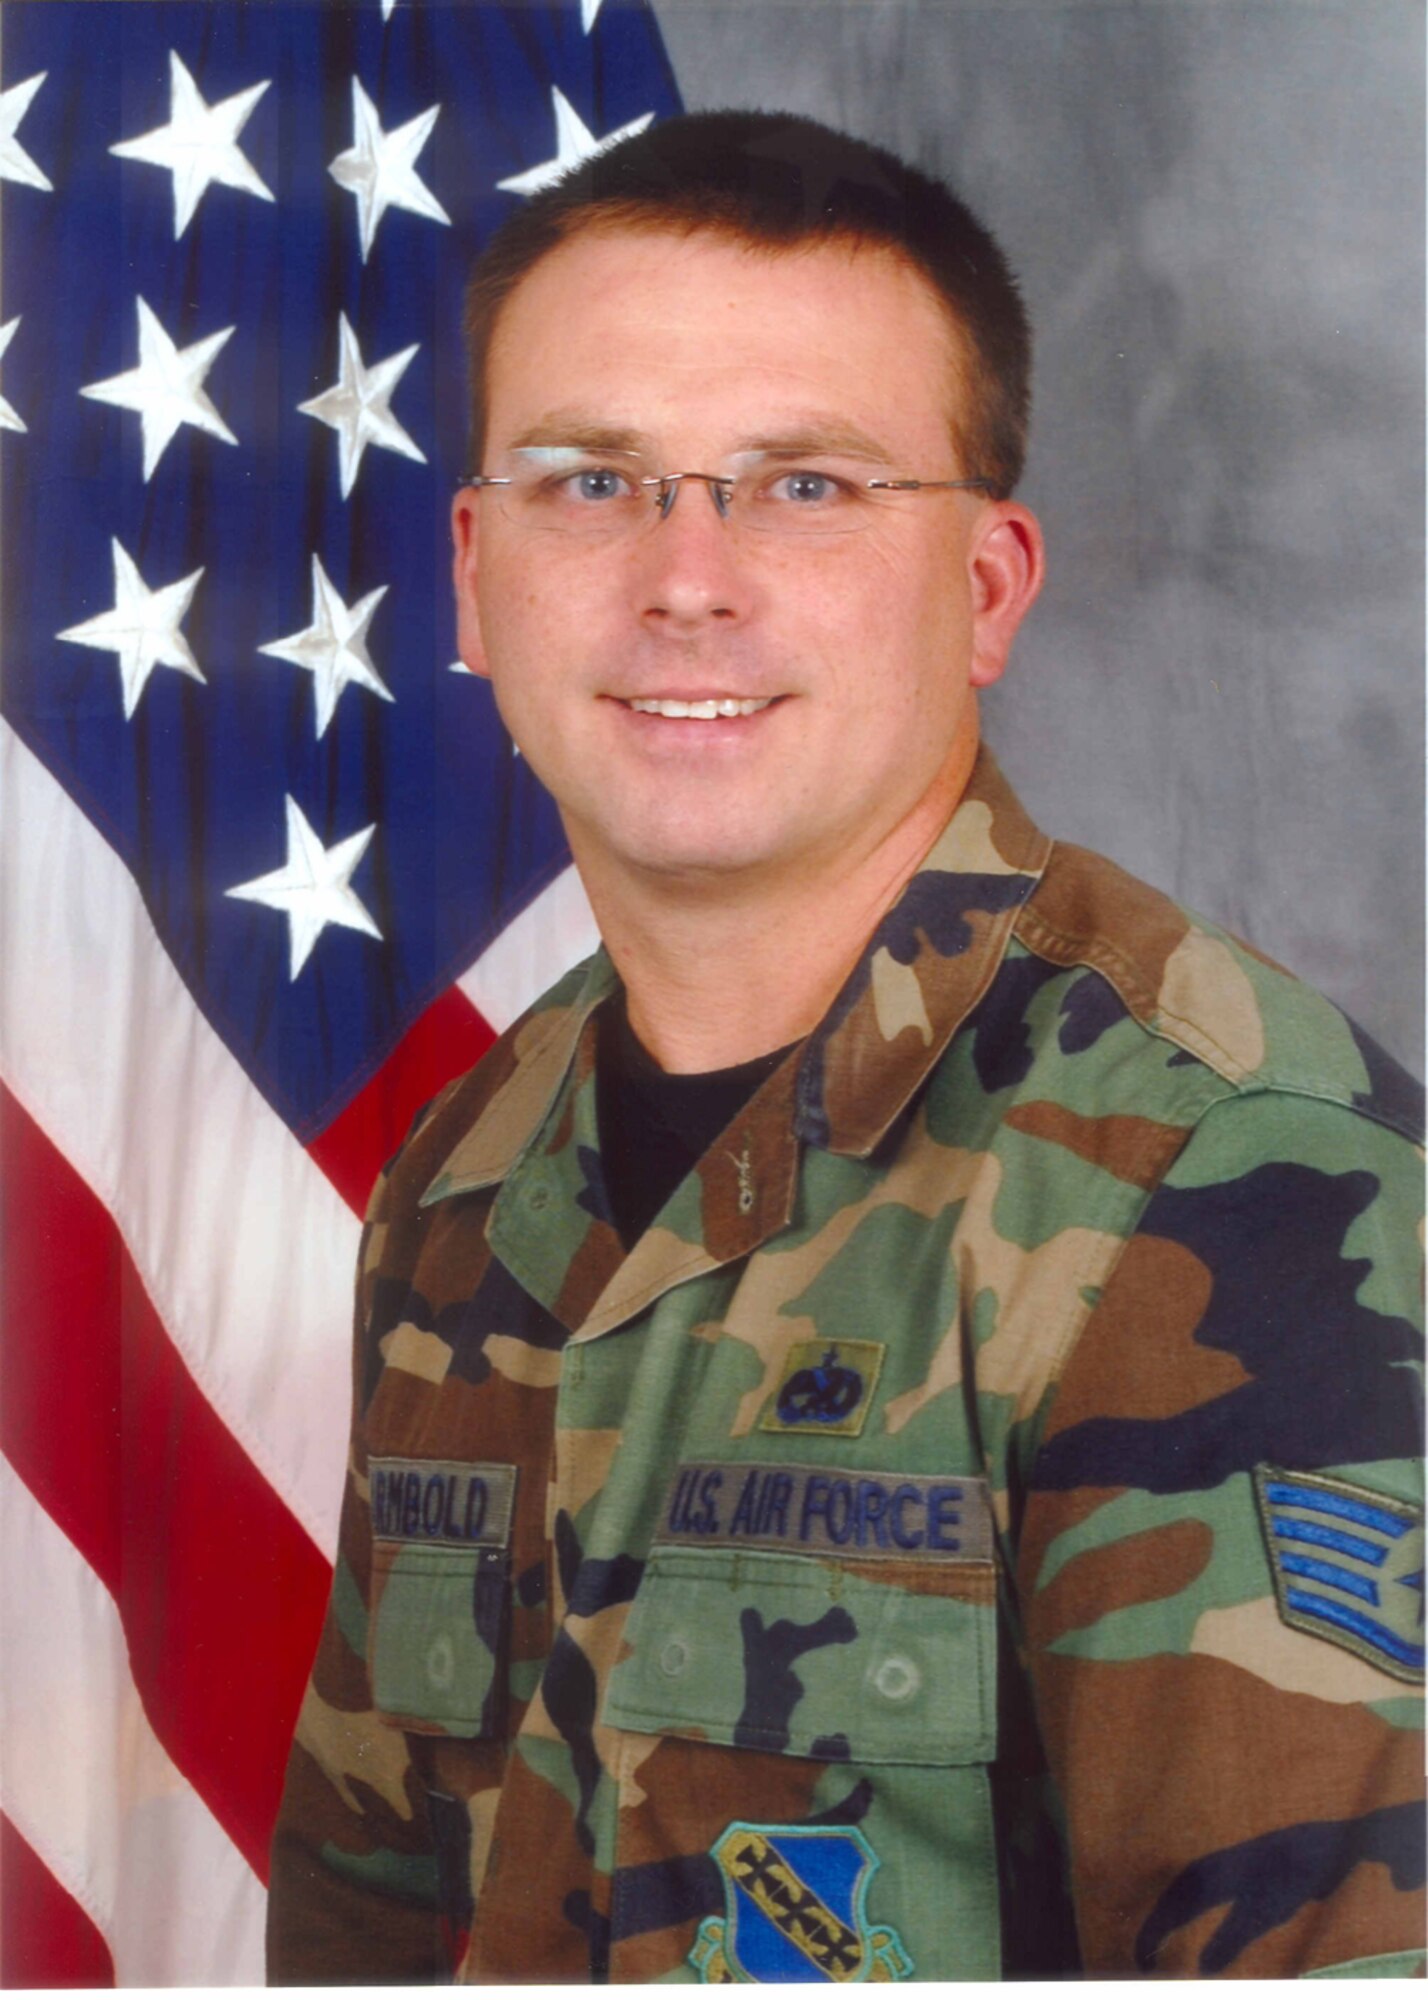 Dyess Warrior of the Week
Staff Sgt. Christopher Warmbold